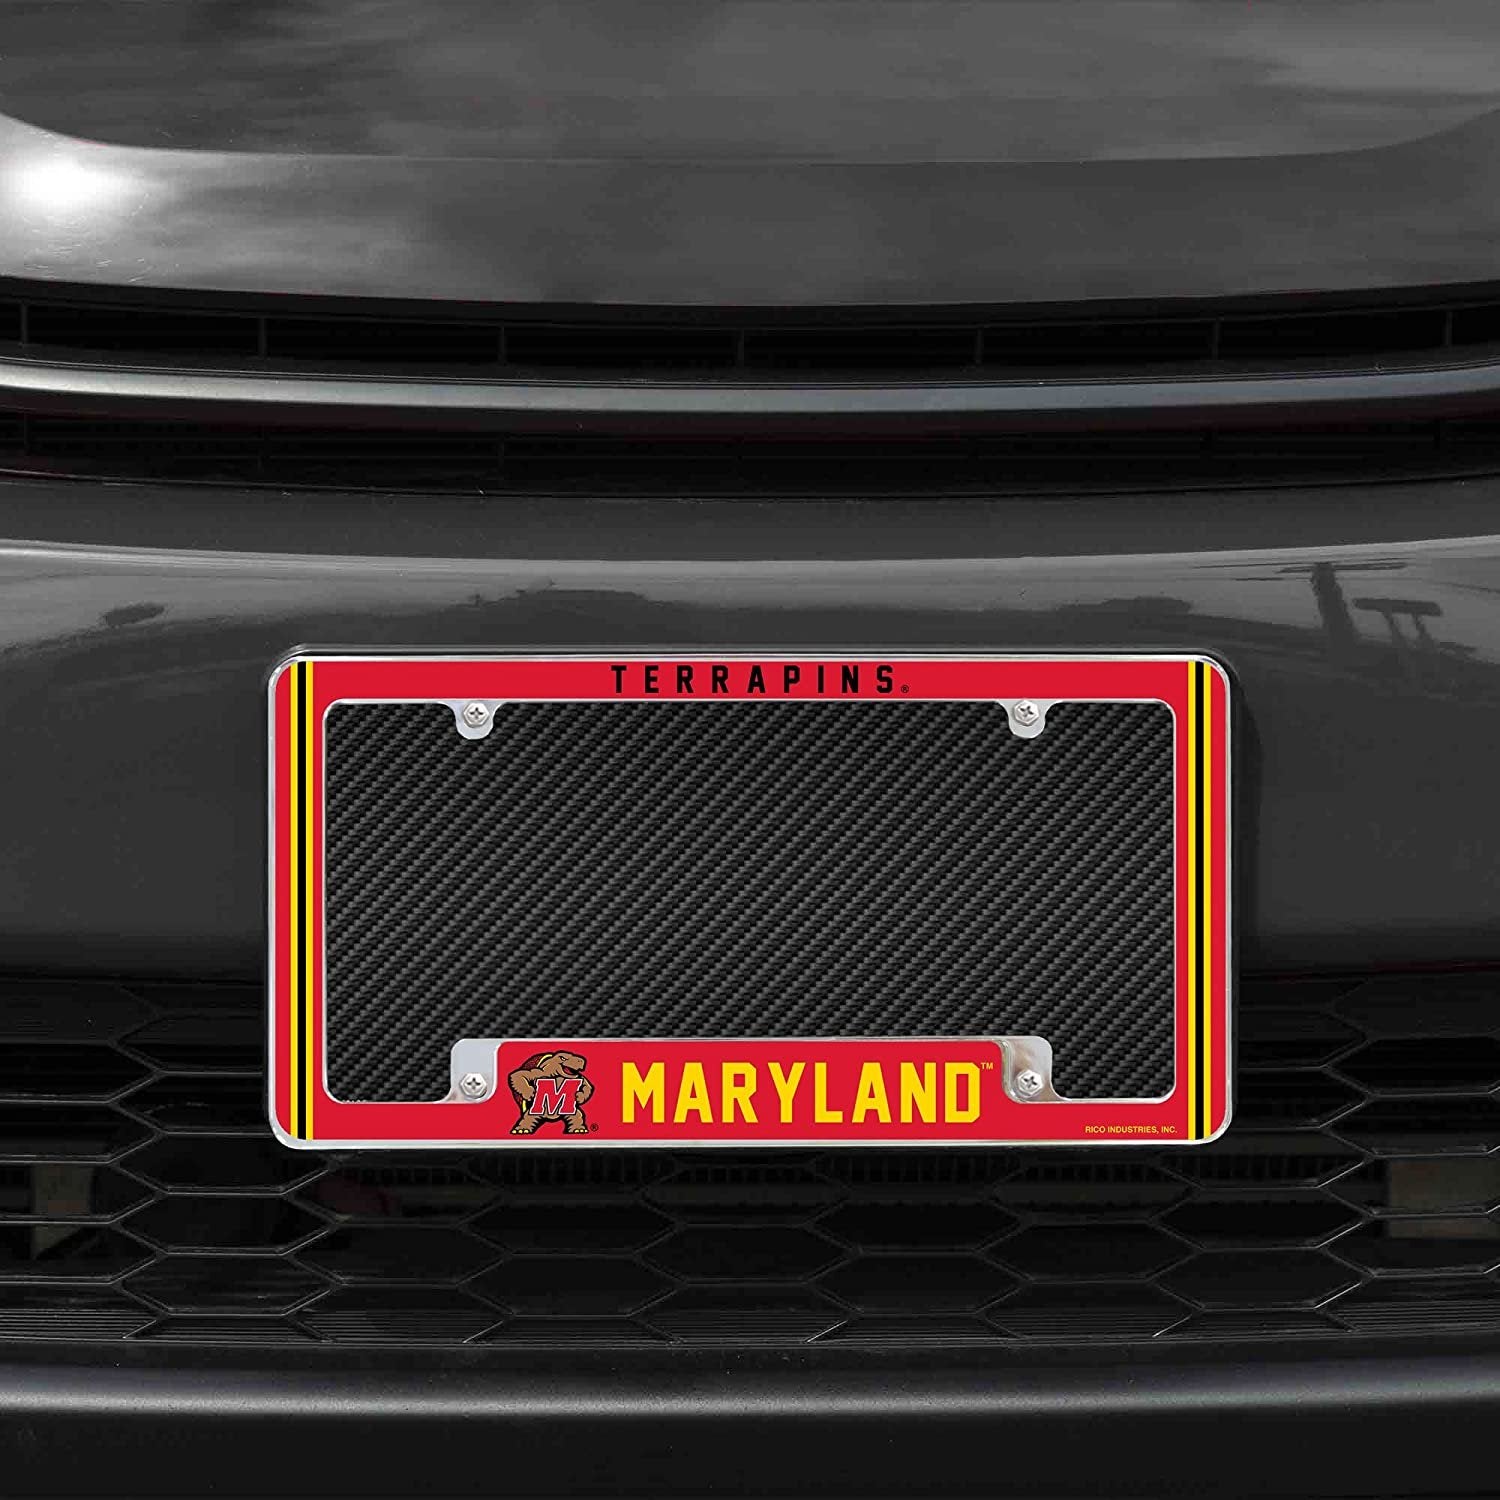 University of Maryland Terrapins Metal License Plate Frame Chrome Tag Cover Alternate Design 6x12 Inch